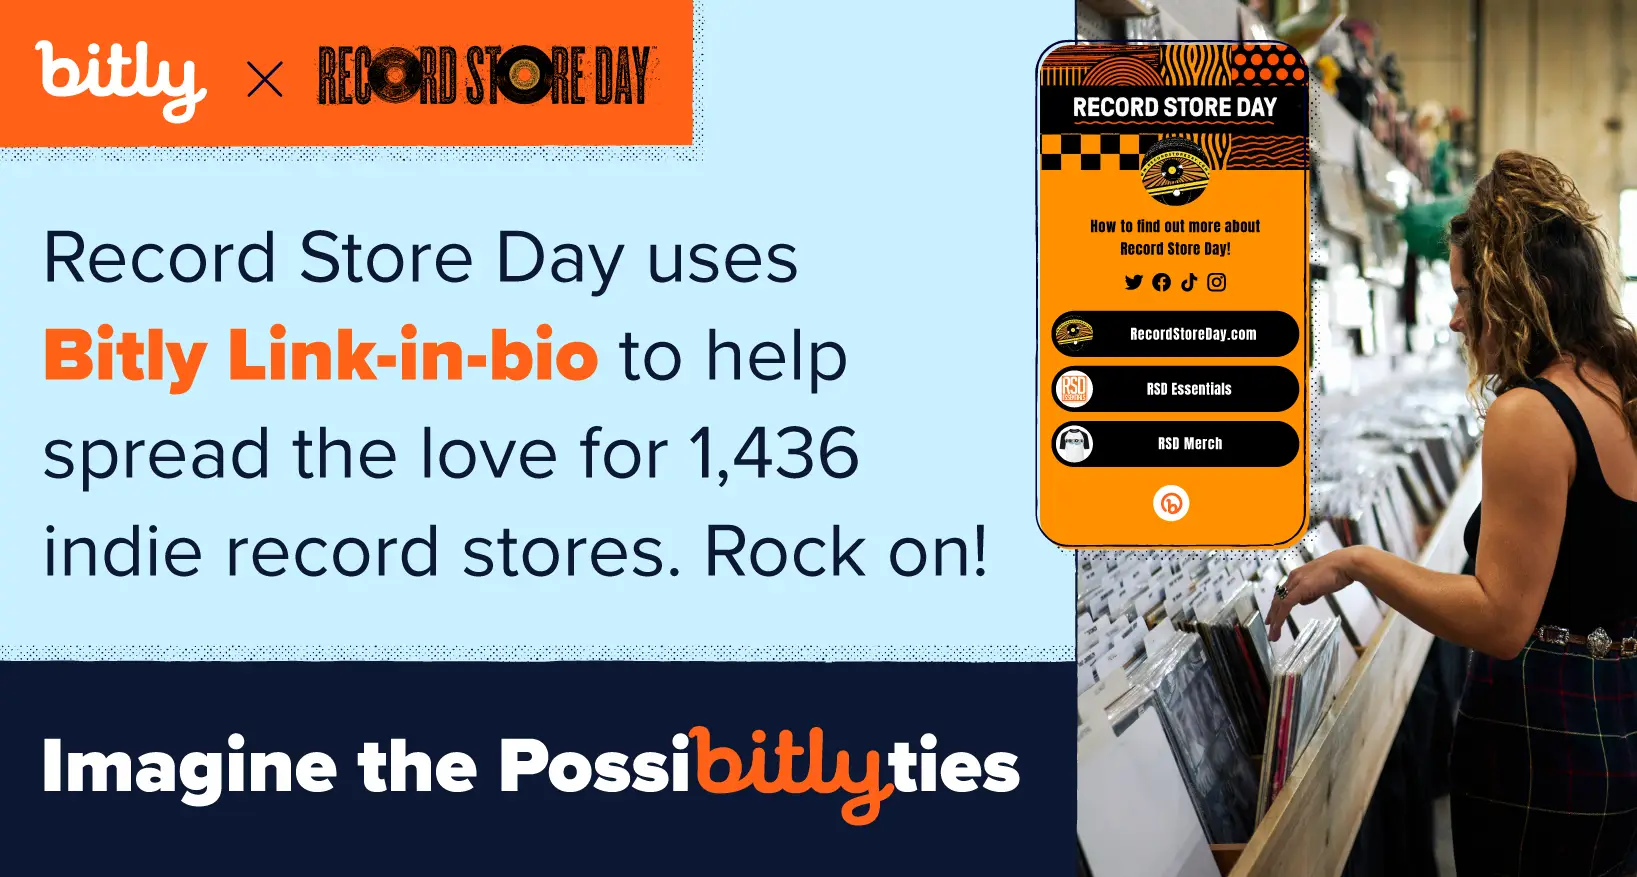 The Imagine the Possibitlies slogan accompanying how Record Store Day uses Bitly Link-in-bio.